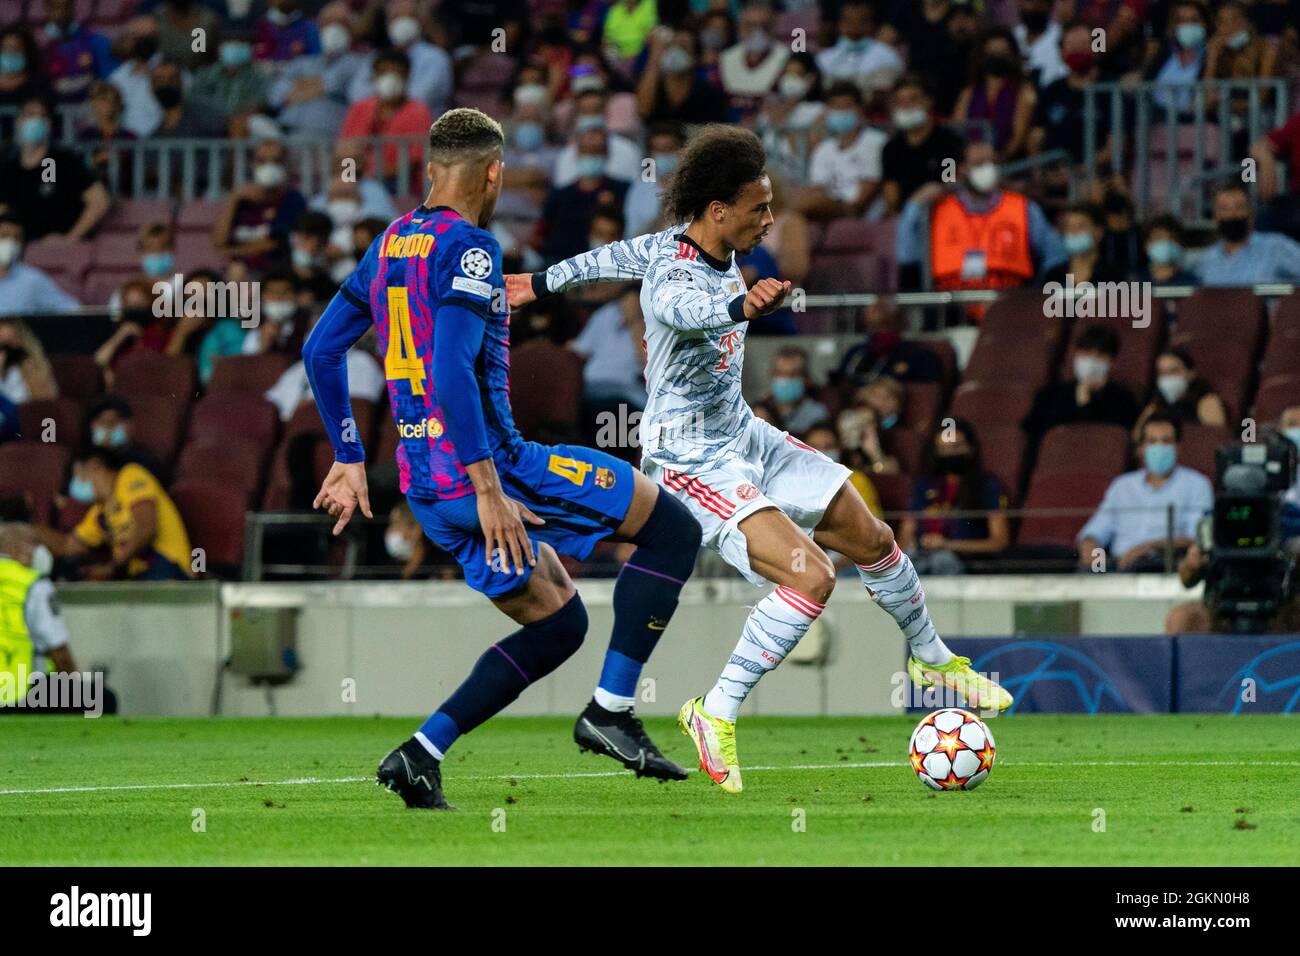 SPAIN, SOCCER, CHAMPIONS LEAGUE, FC BARCELONA VS FC BAYERN MUNICH.  FC Bayern Munchen (10) Leroy Sané vies with (4) Ronald Araujo during Champions League group phase match between FC Barcelona and  FC Bayern Munich in Camp Nou, Barcelona, Spain, on September 14, 2021.  © Joan Gosa 2021 Stock Photo